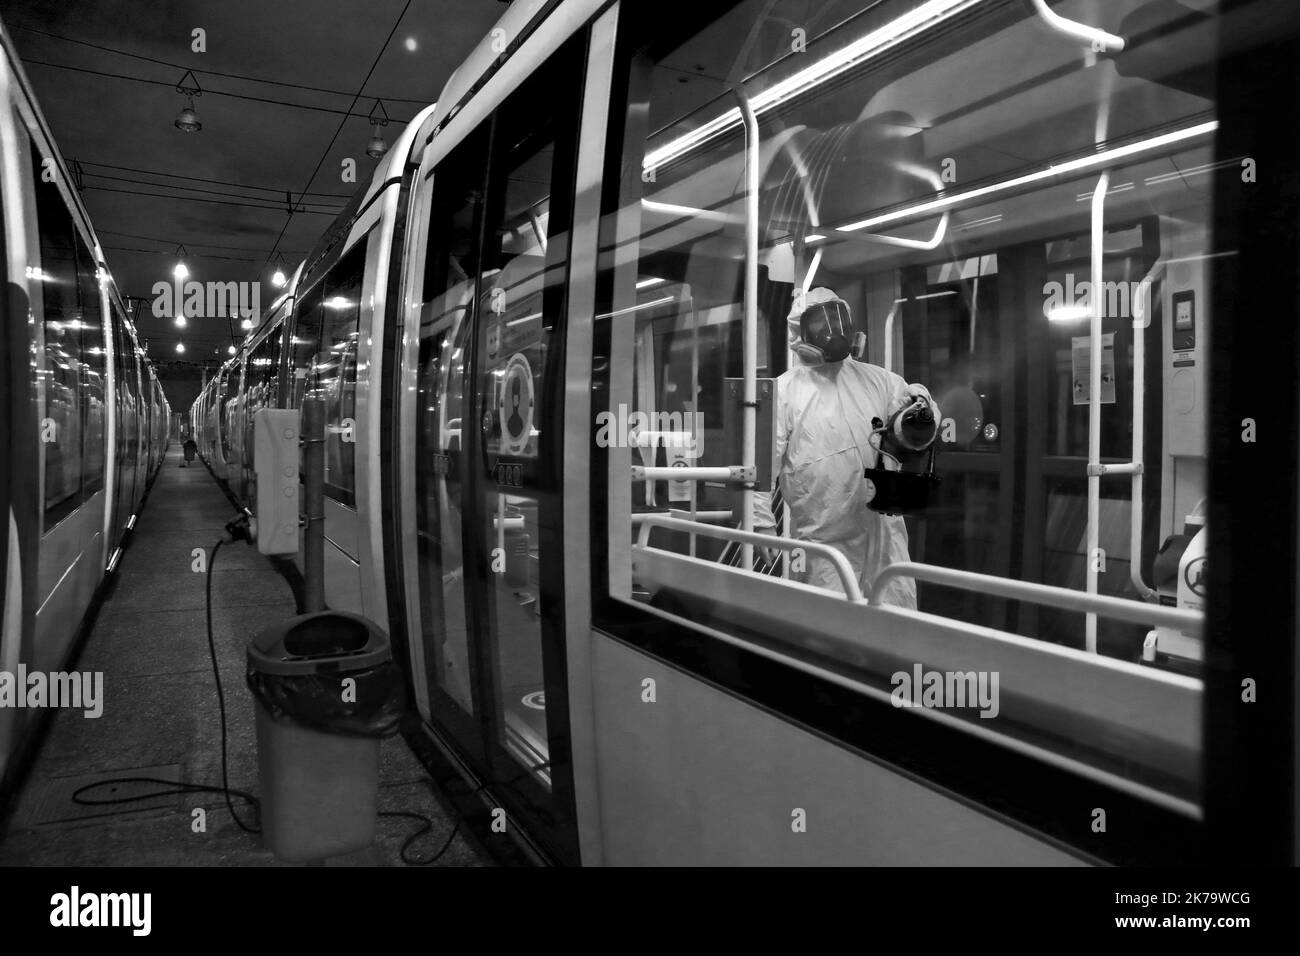 Mulhouse, France, june 3rd 2020 - People cleaning public transports during the covid-19 pandemic Stock Photo